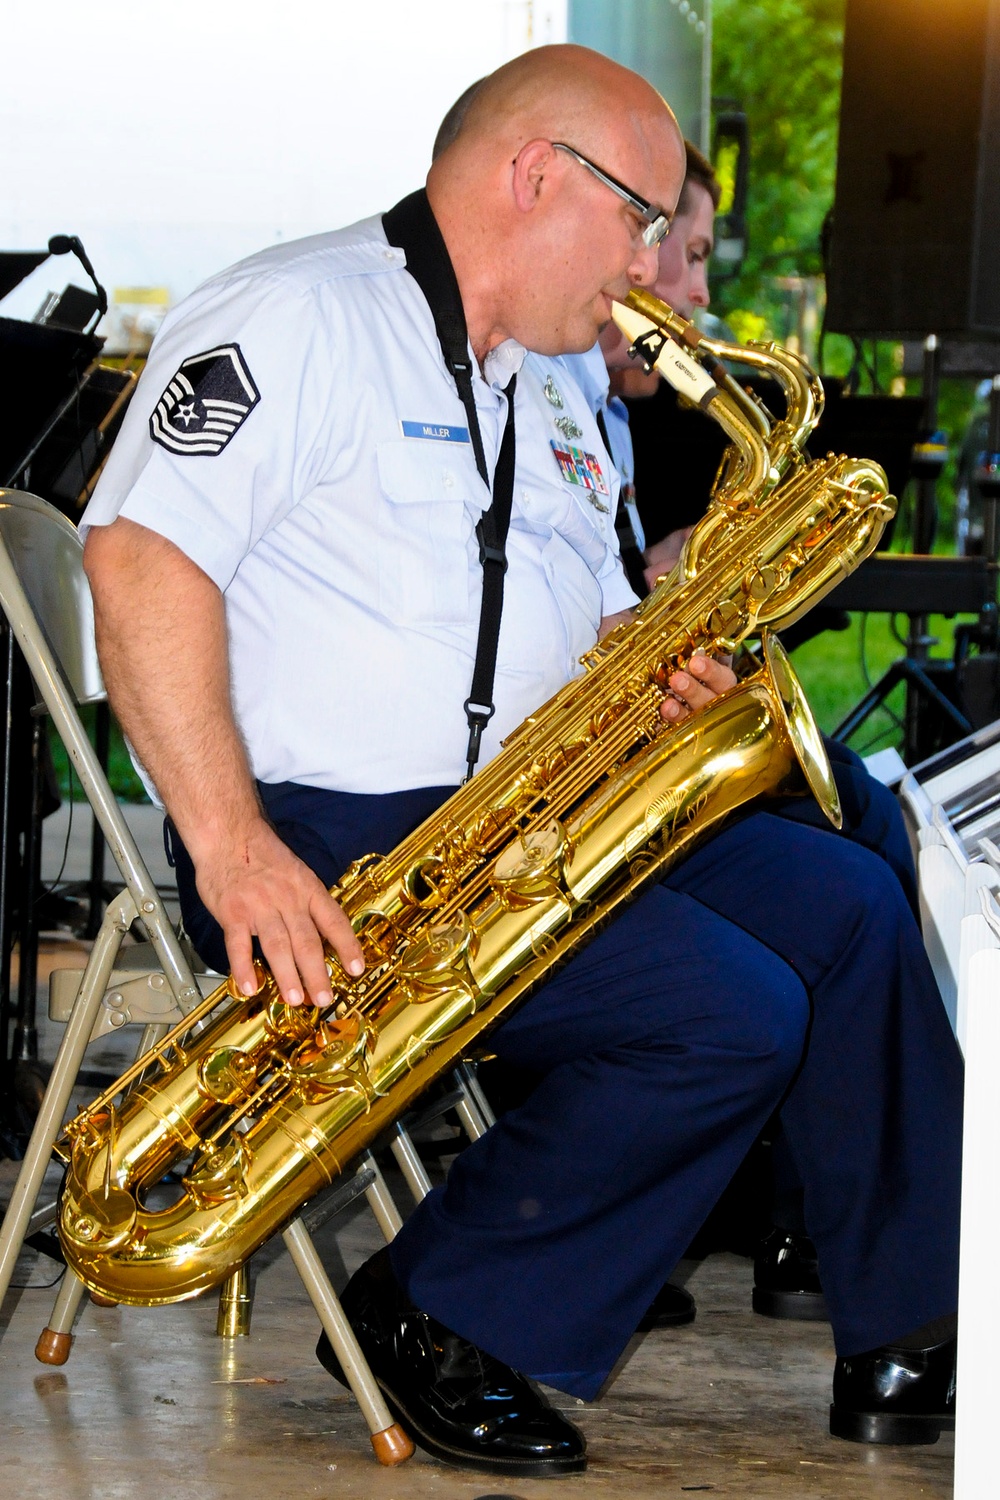 566th musician awarded for community outreach